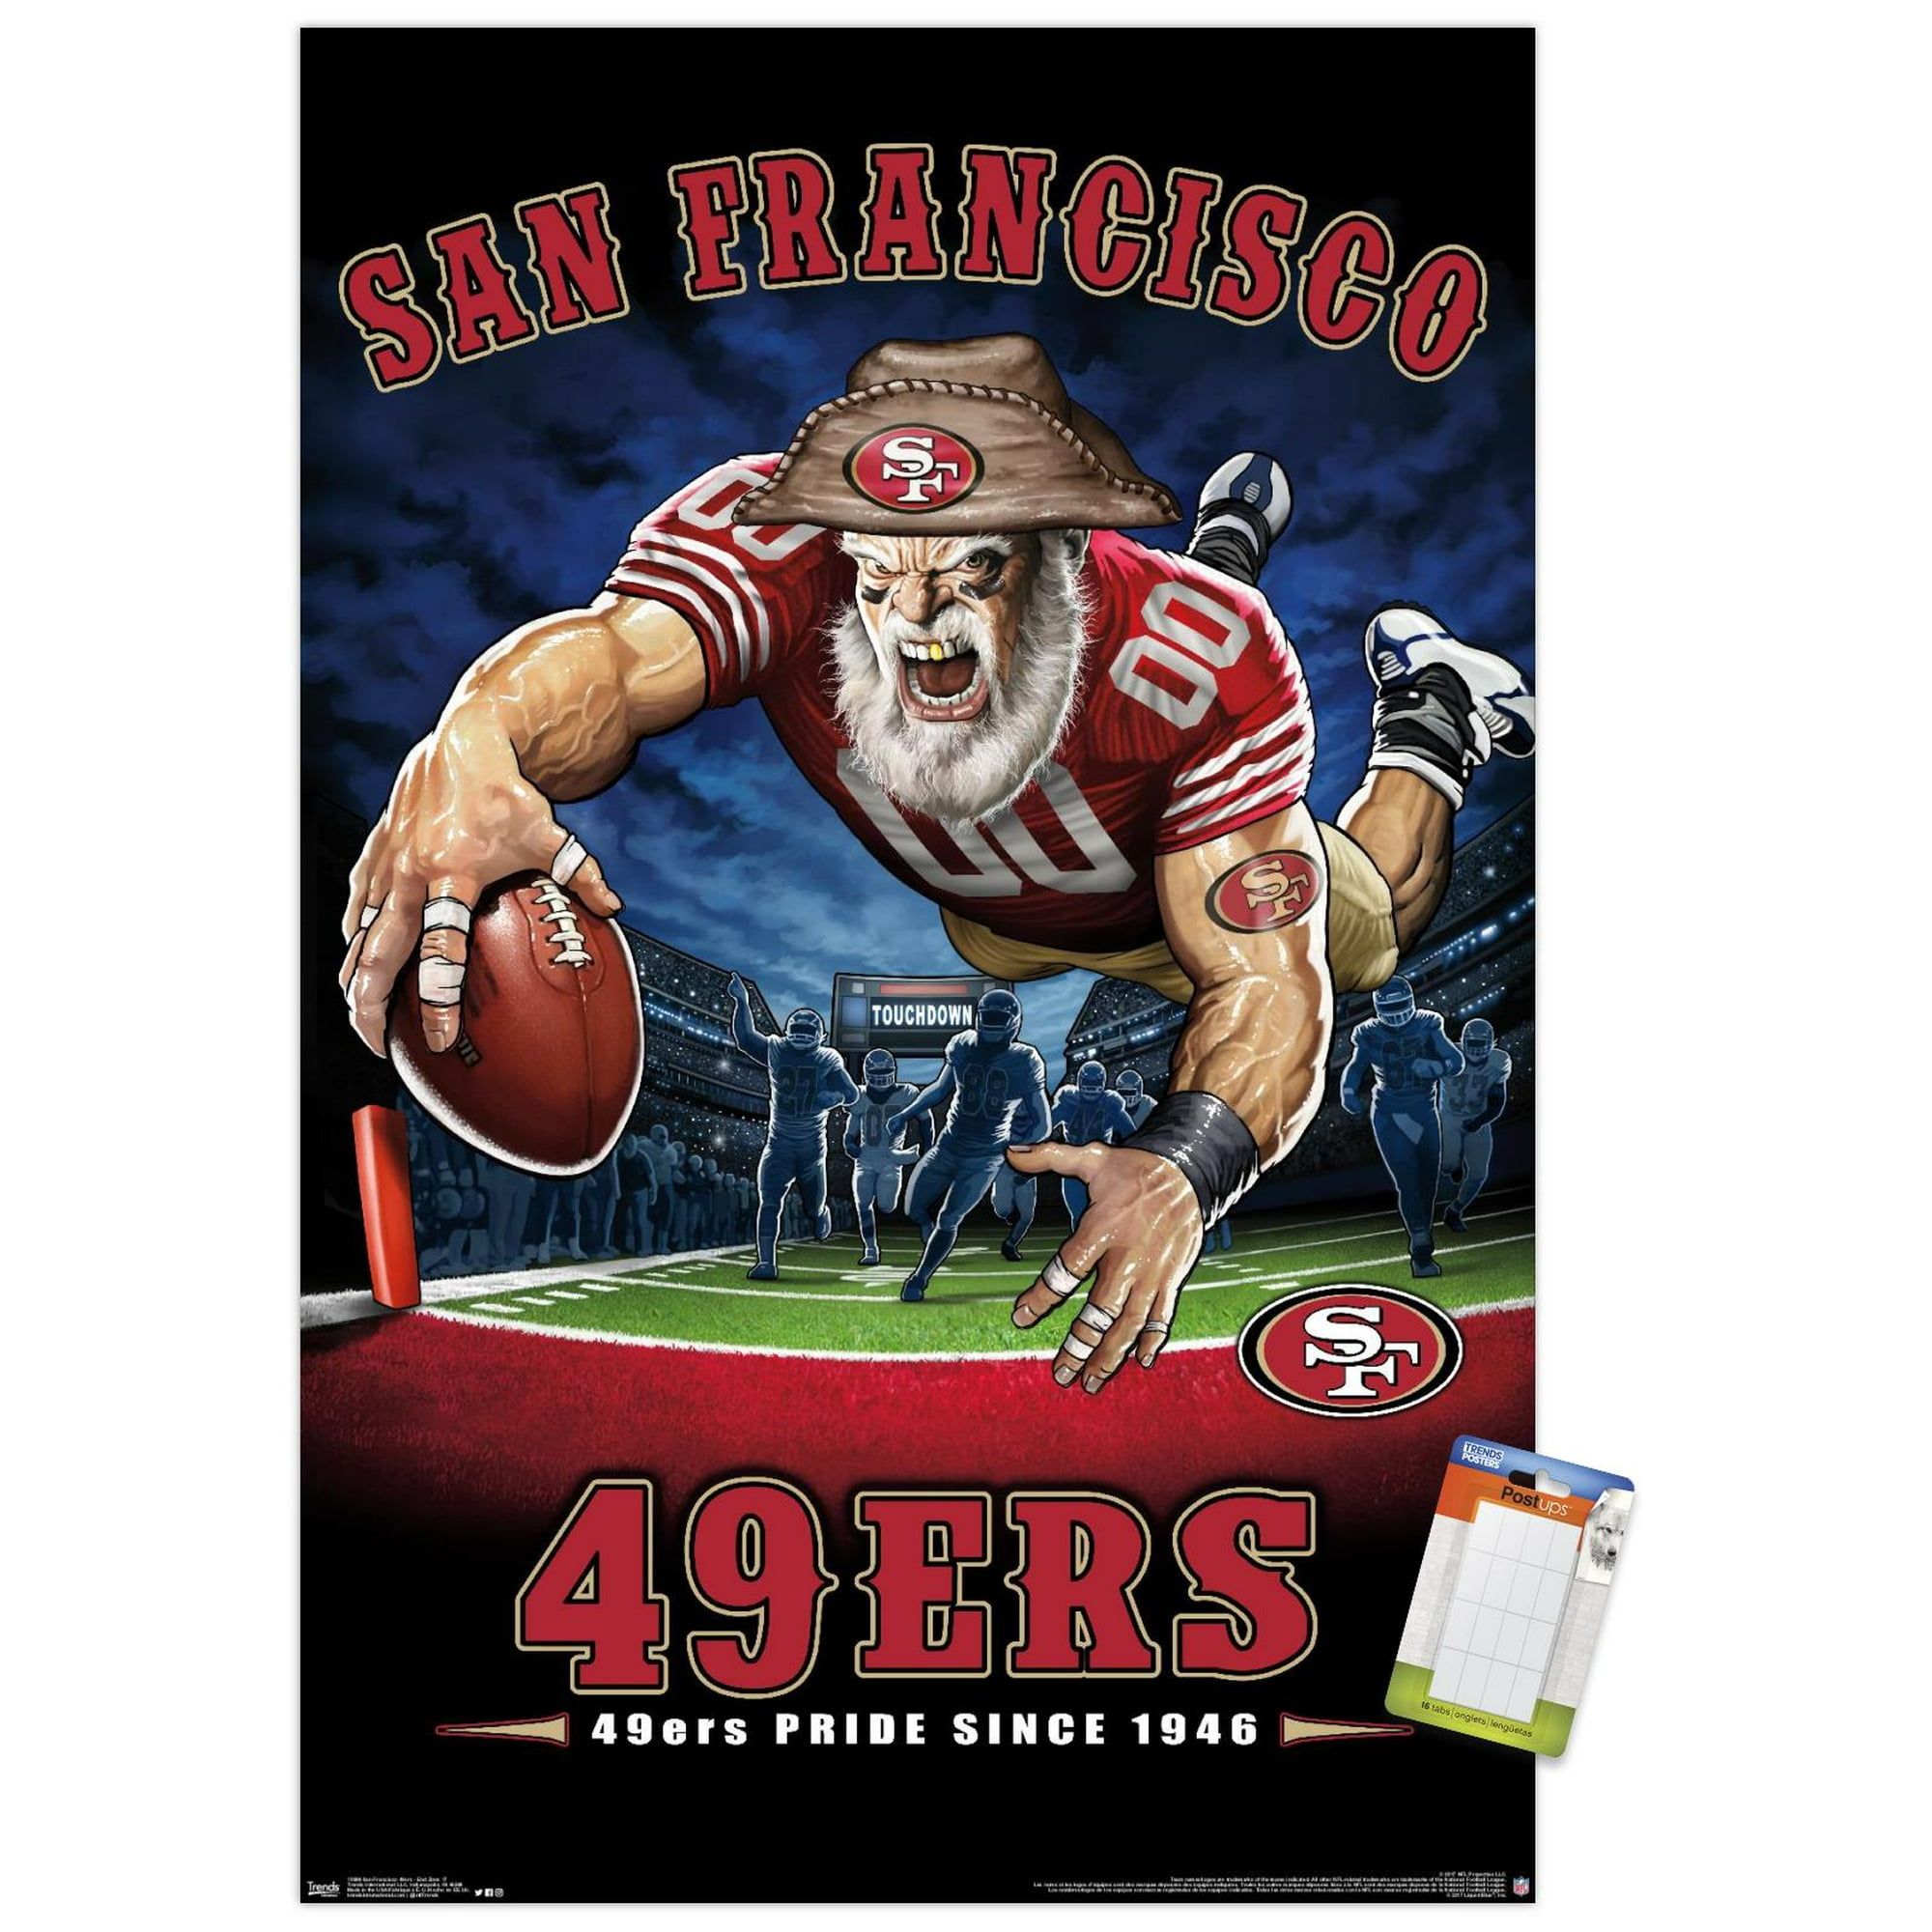 NFL San Francisco 49ers - End Zone 17 Wall Poster, 22.375' x 34'